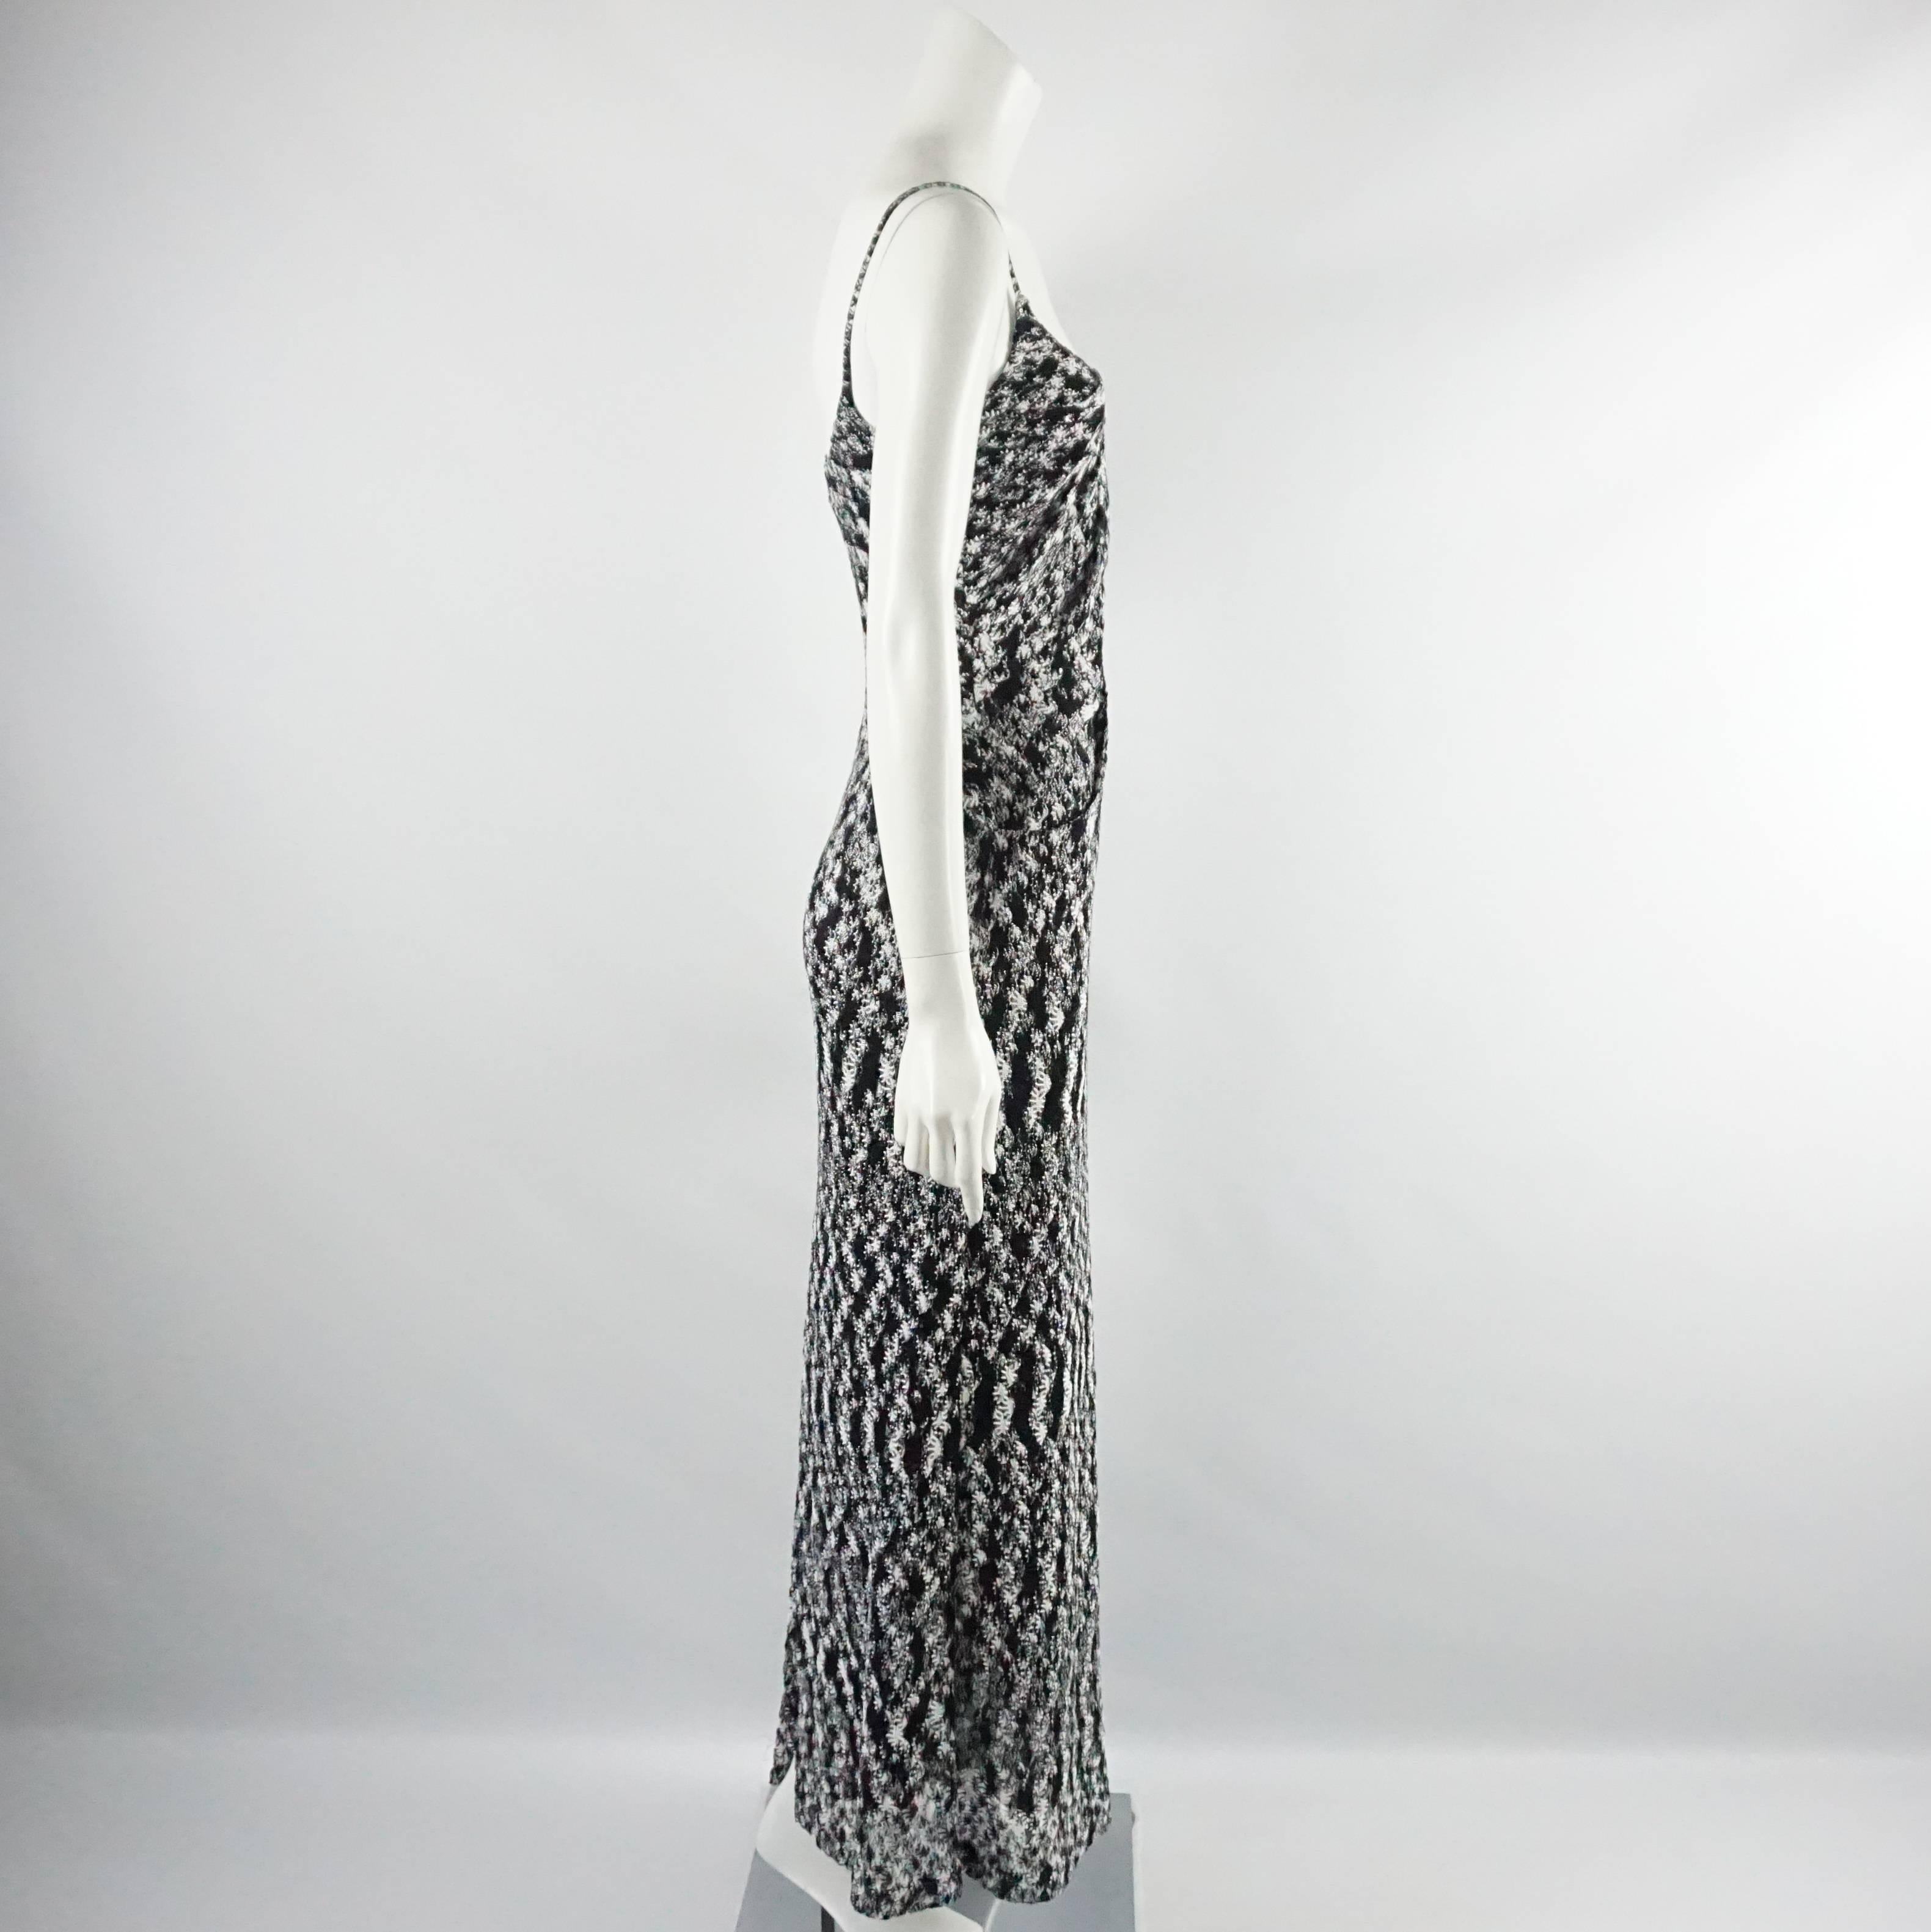 This Missoni knitted maxi dress is a black and white print. It has spaghetti straps, pockets, and a slit in the back. This dress is in excellent condition.

Measurements
Bust: 32 in.
Waist: 28 in.
Hips: 33 in.
Length: 57 in.
Slit Length: 22.5 in. 